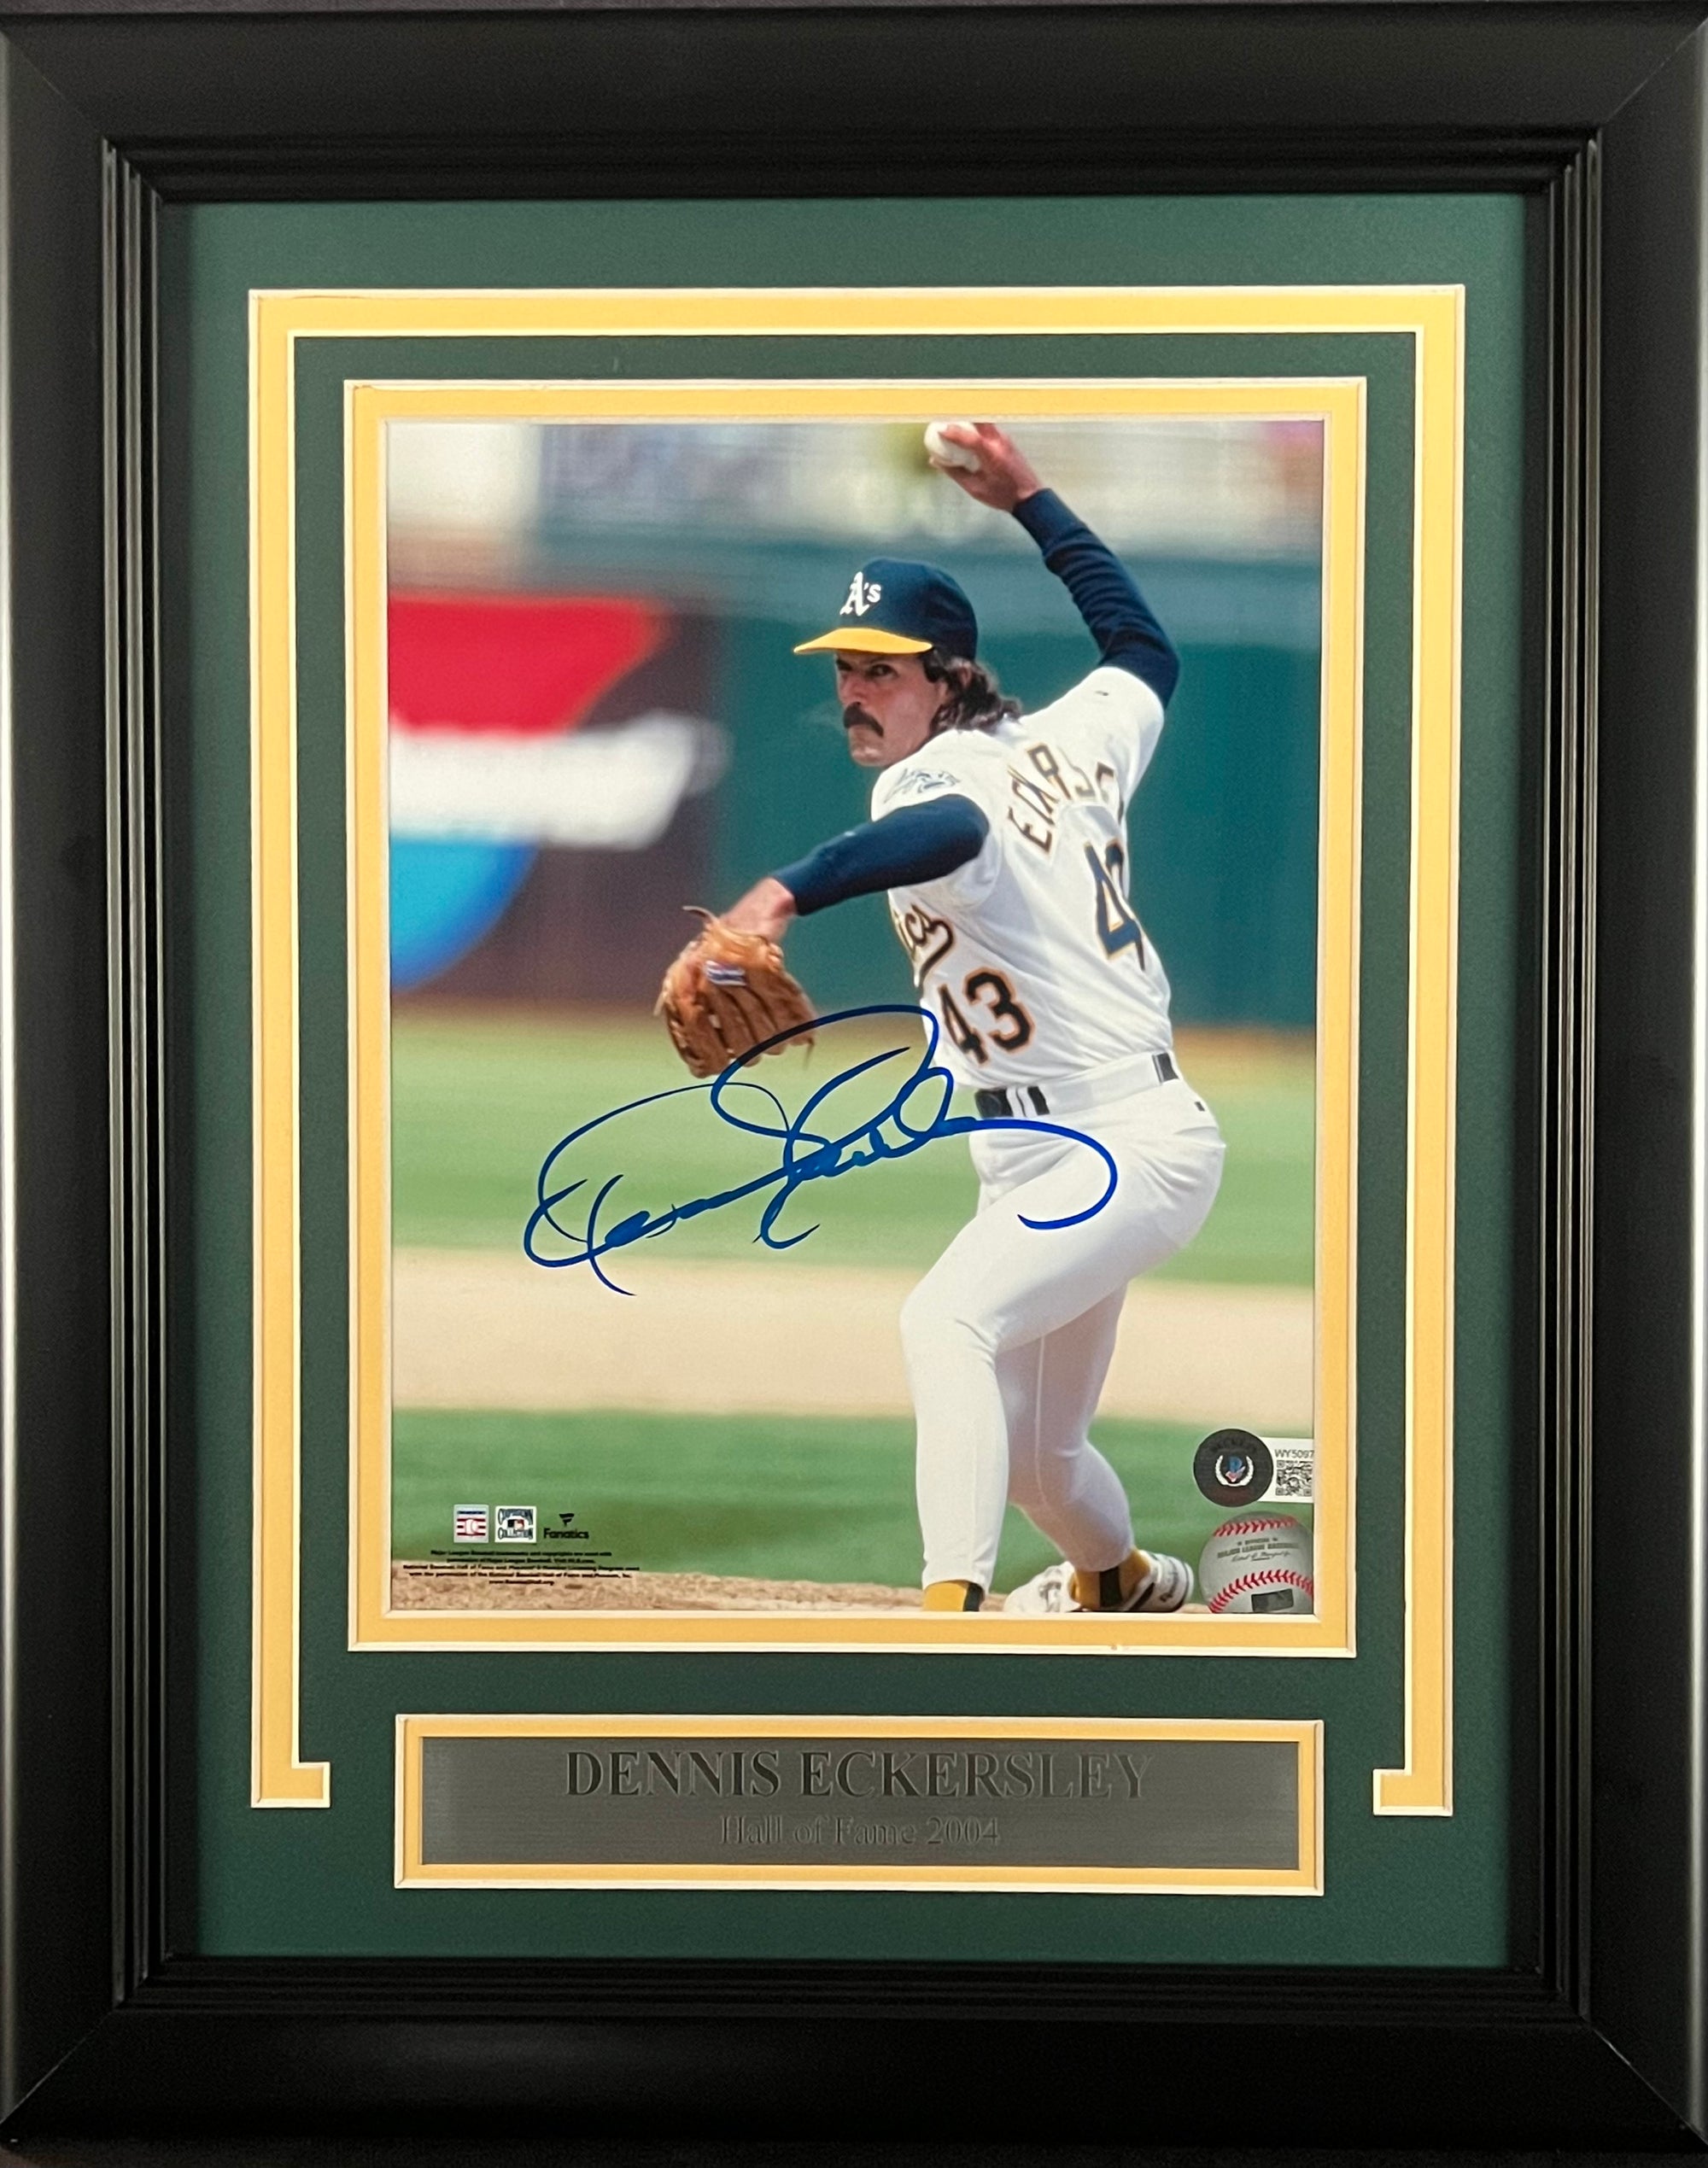 Dennis Eckersley Oakland A's Autographed 8x10 Photo Framed